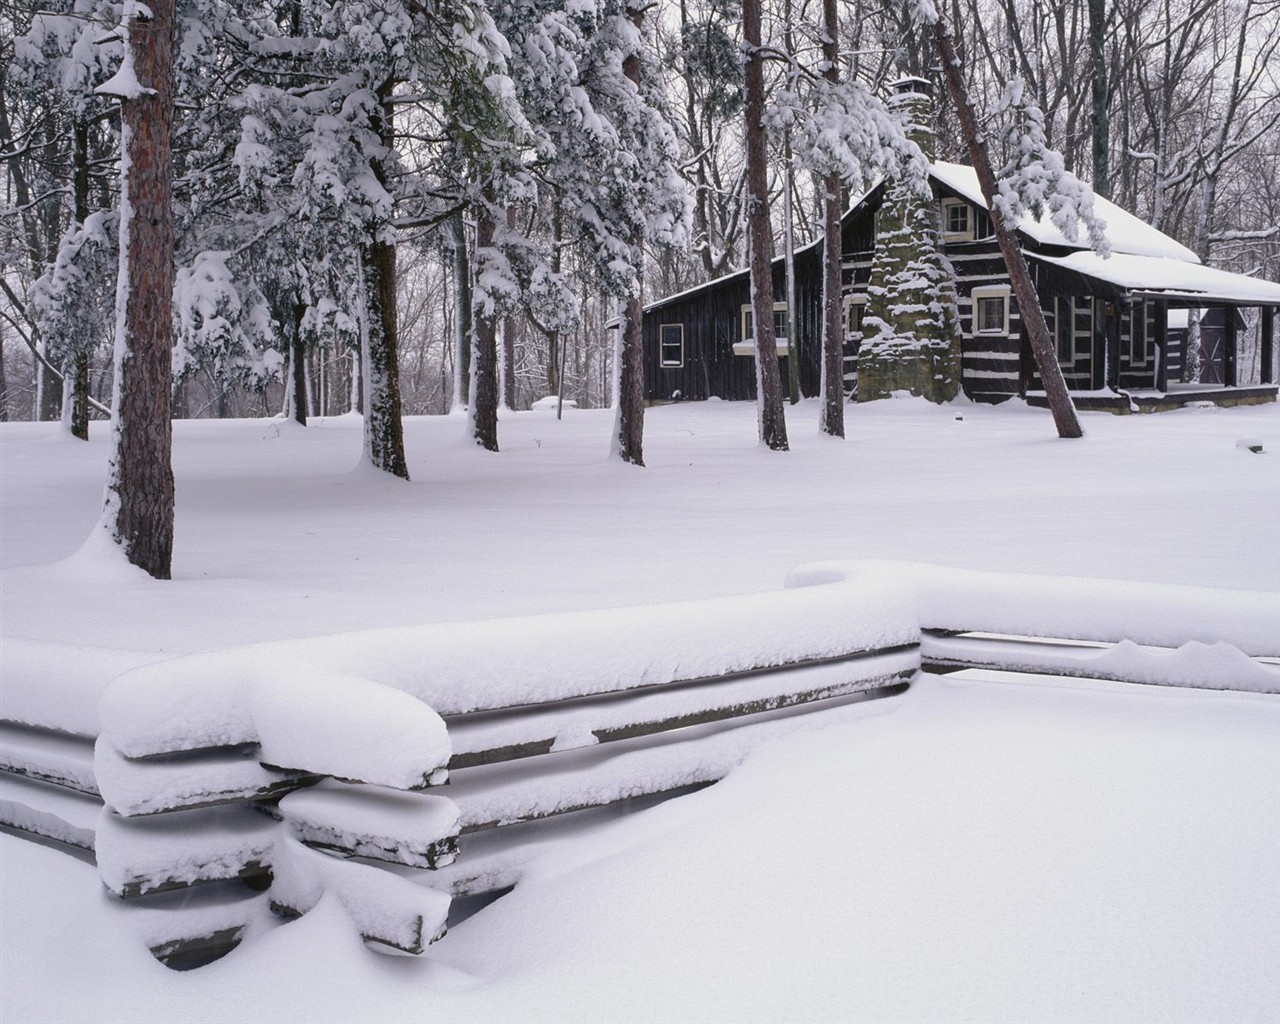 Snow Forest Wallpaper - Snow Covered Cabin - HD Wallpaper 